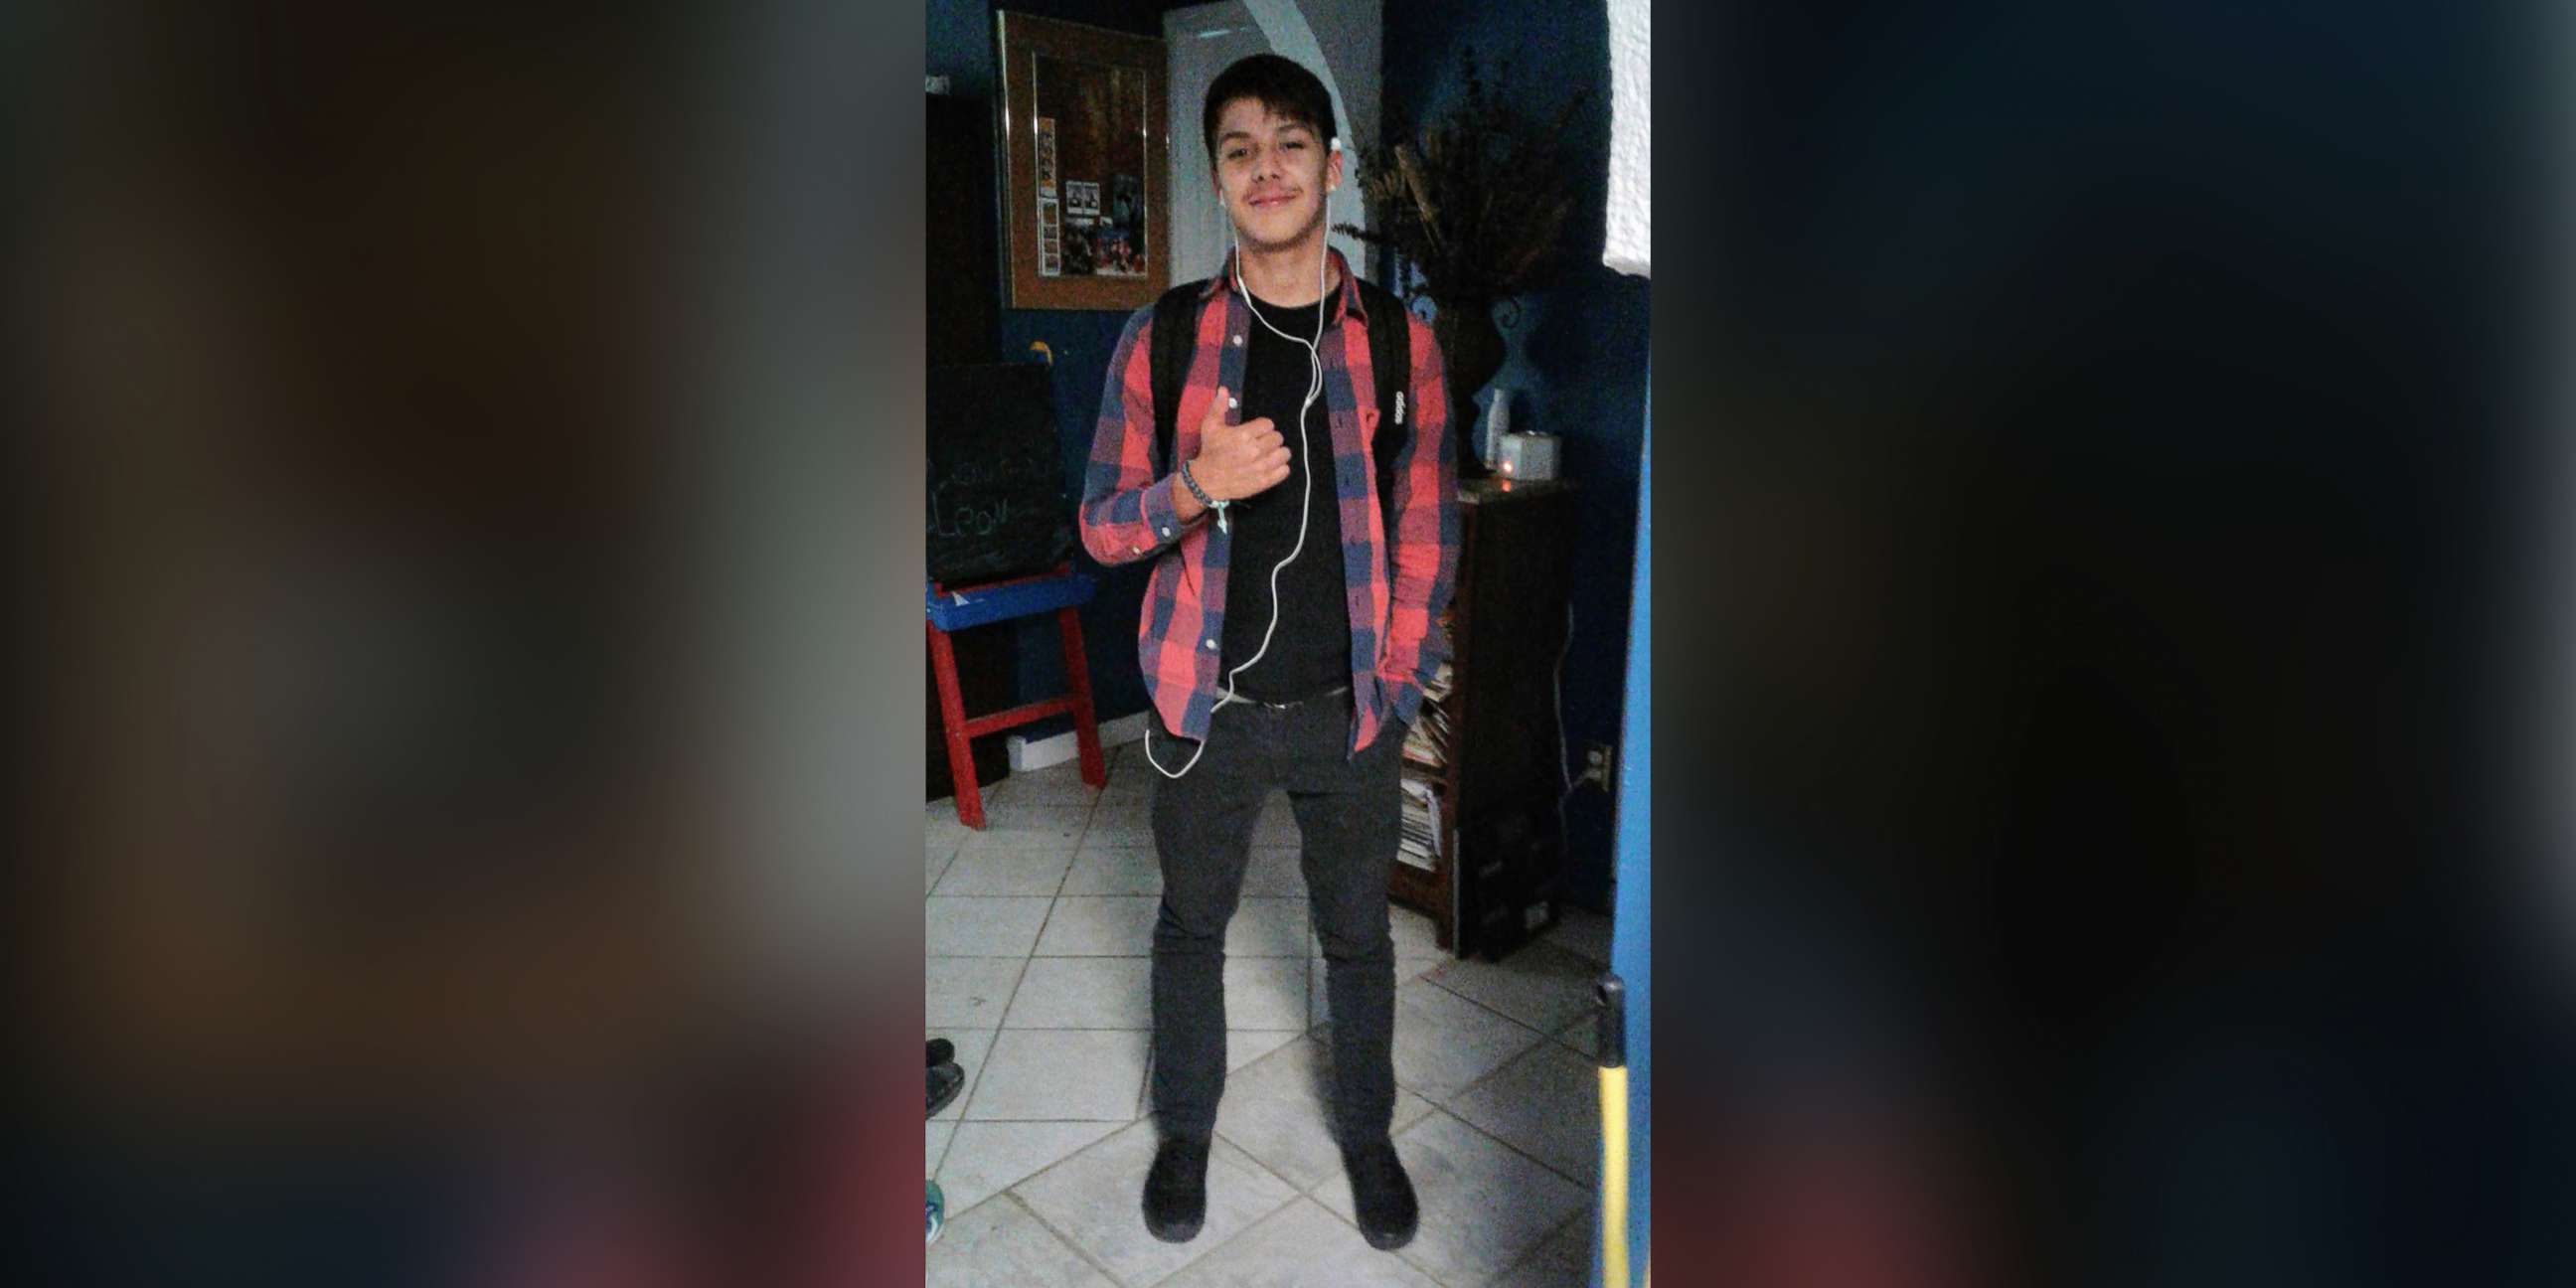 PHOTO: Brought to the country as a young child, Brandon Salinas, age 18, was deported from the U.S. after being charged with possession of marijuana on private property.